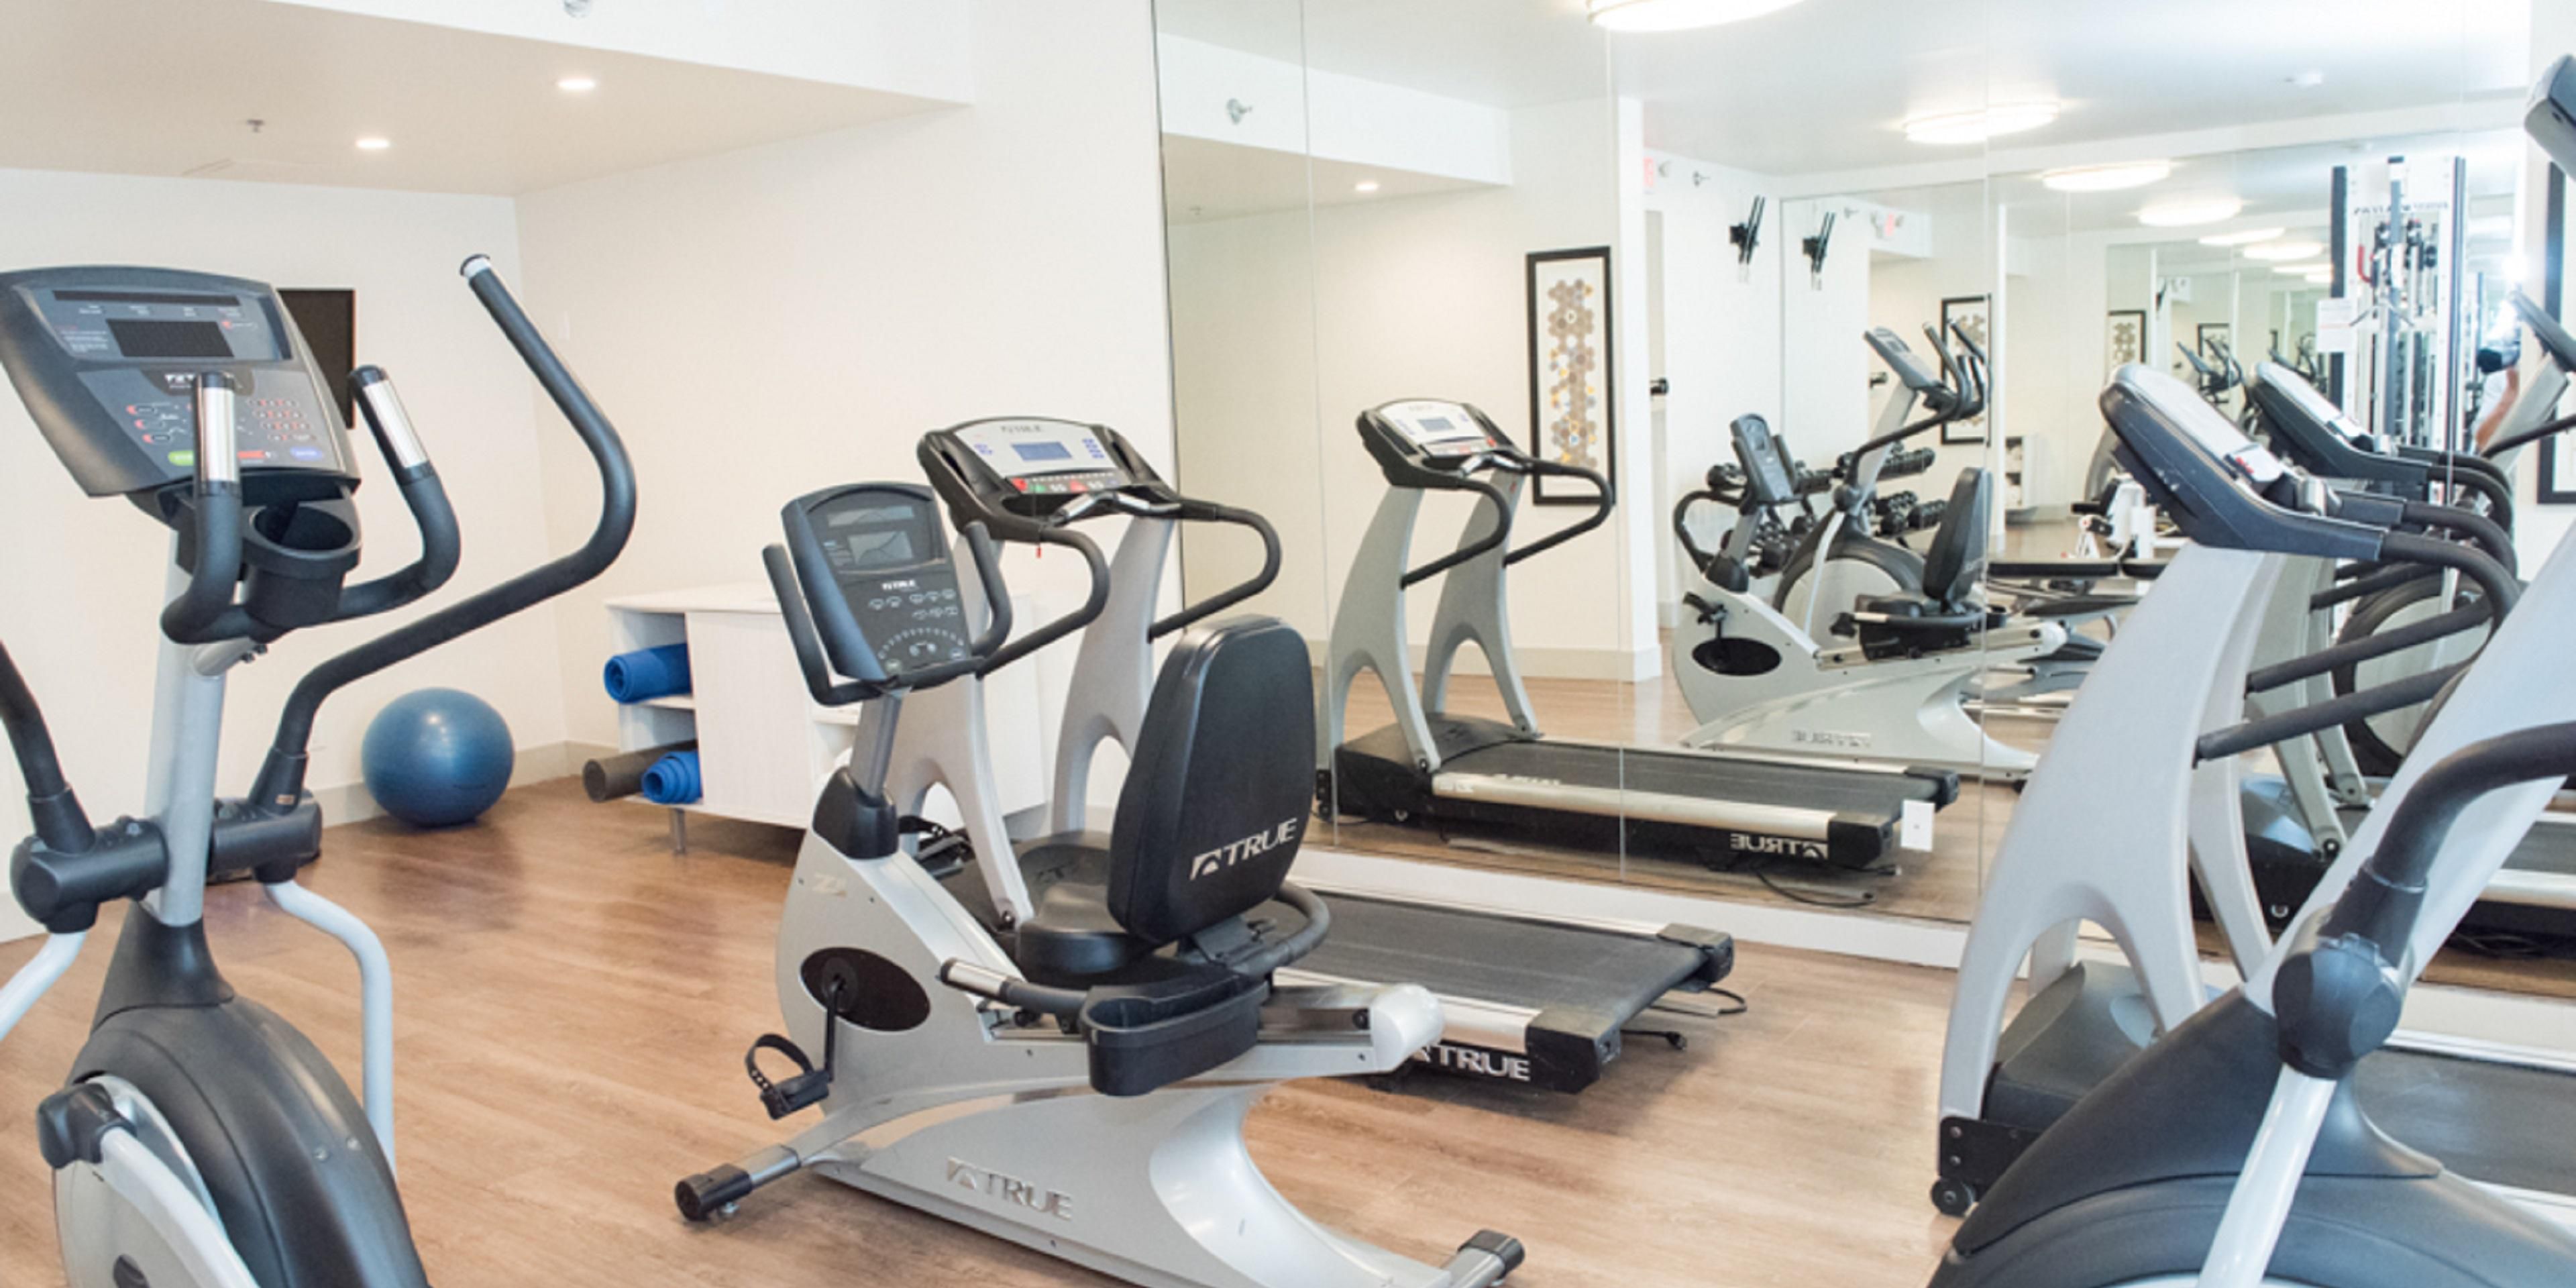 Maintaining your routine while traveling is important especially when you're short on time and on the go. We totally get it. Recharge and feel ready for anything with our state of the art fitness center that is open 24 hours a day. 